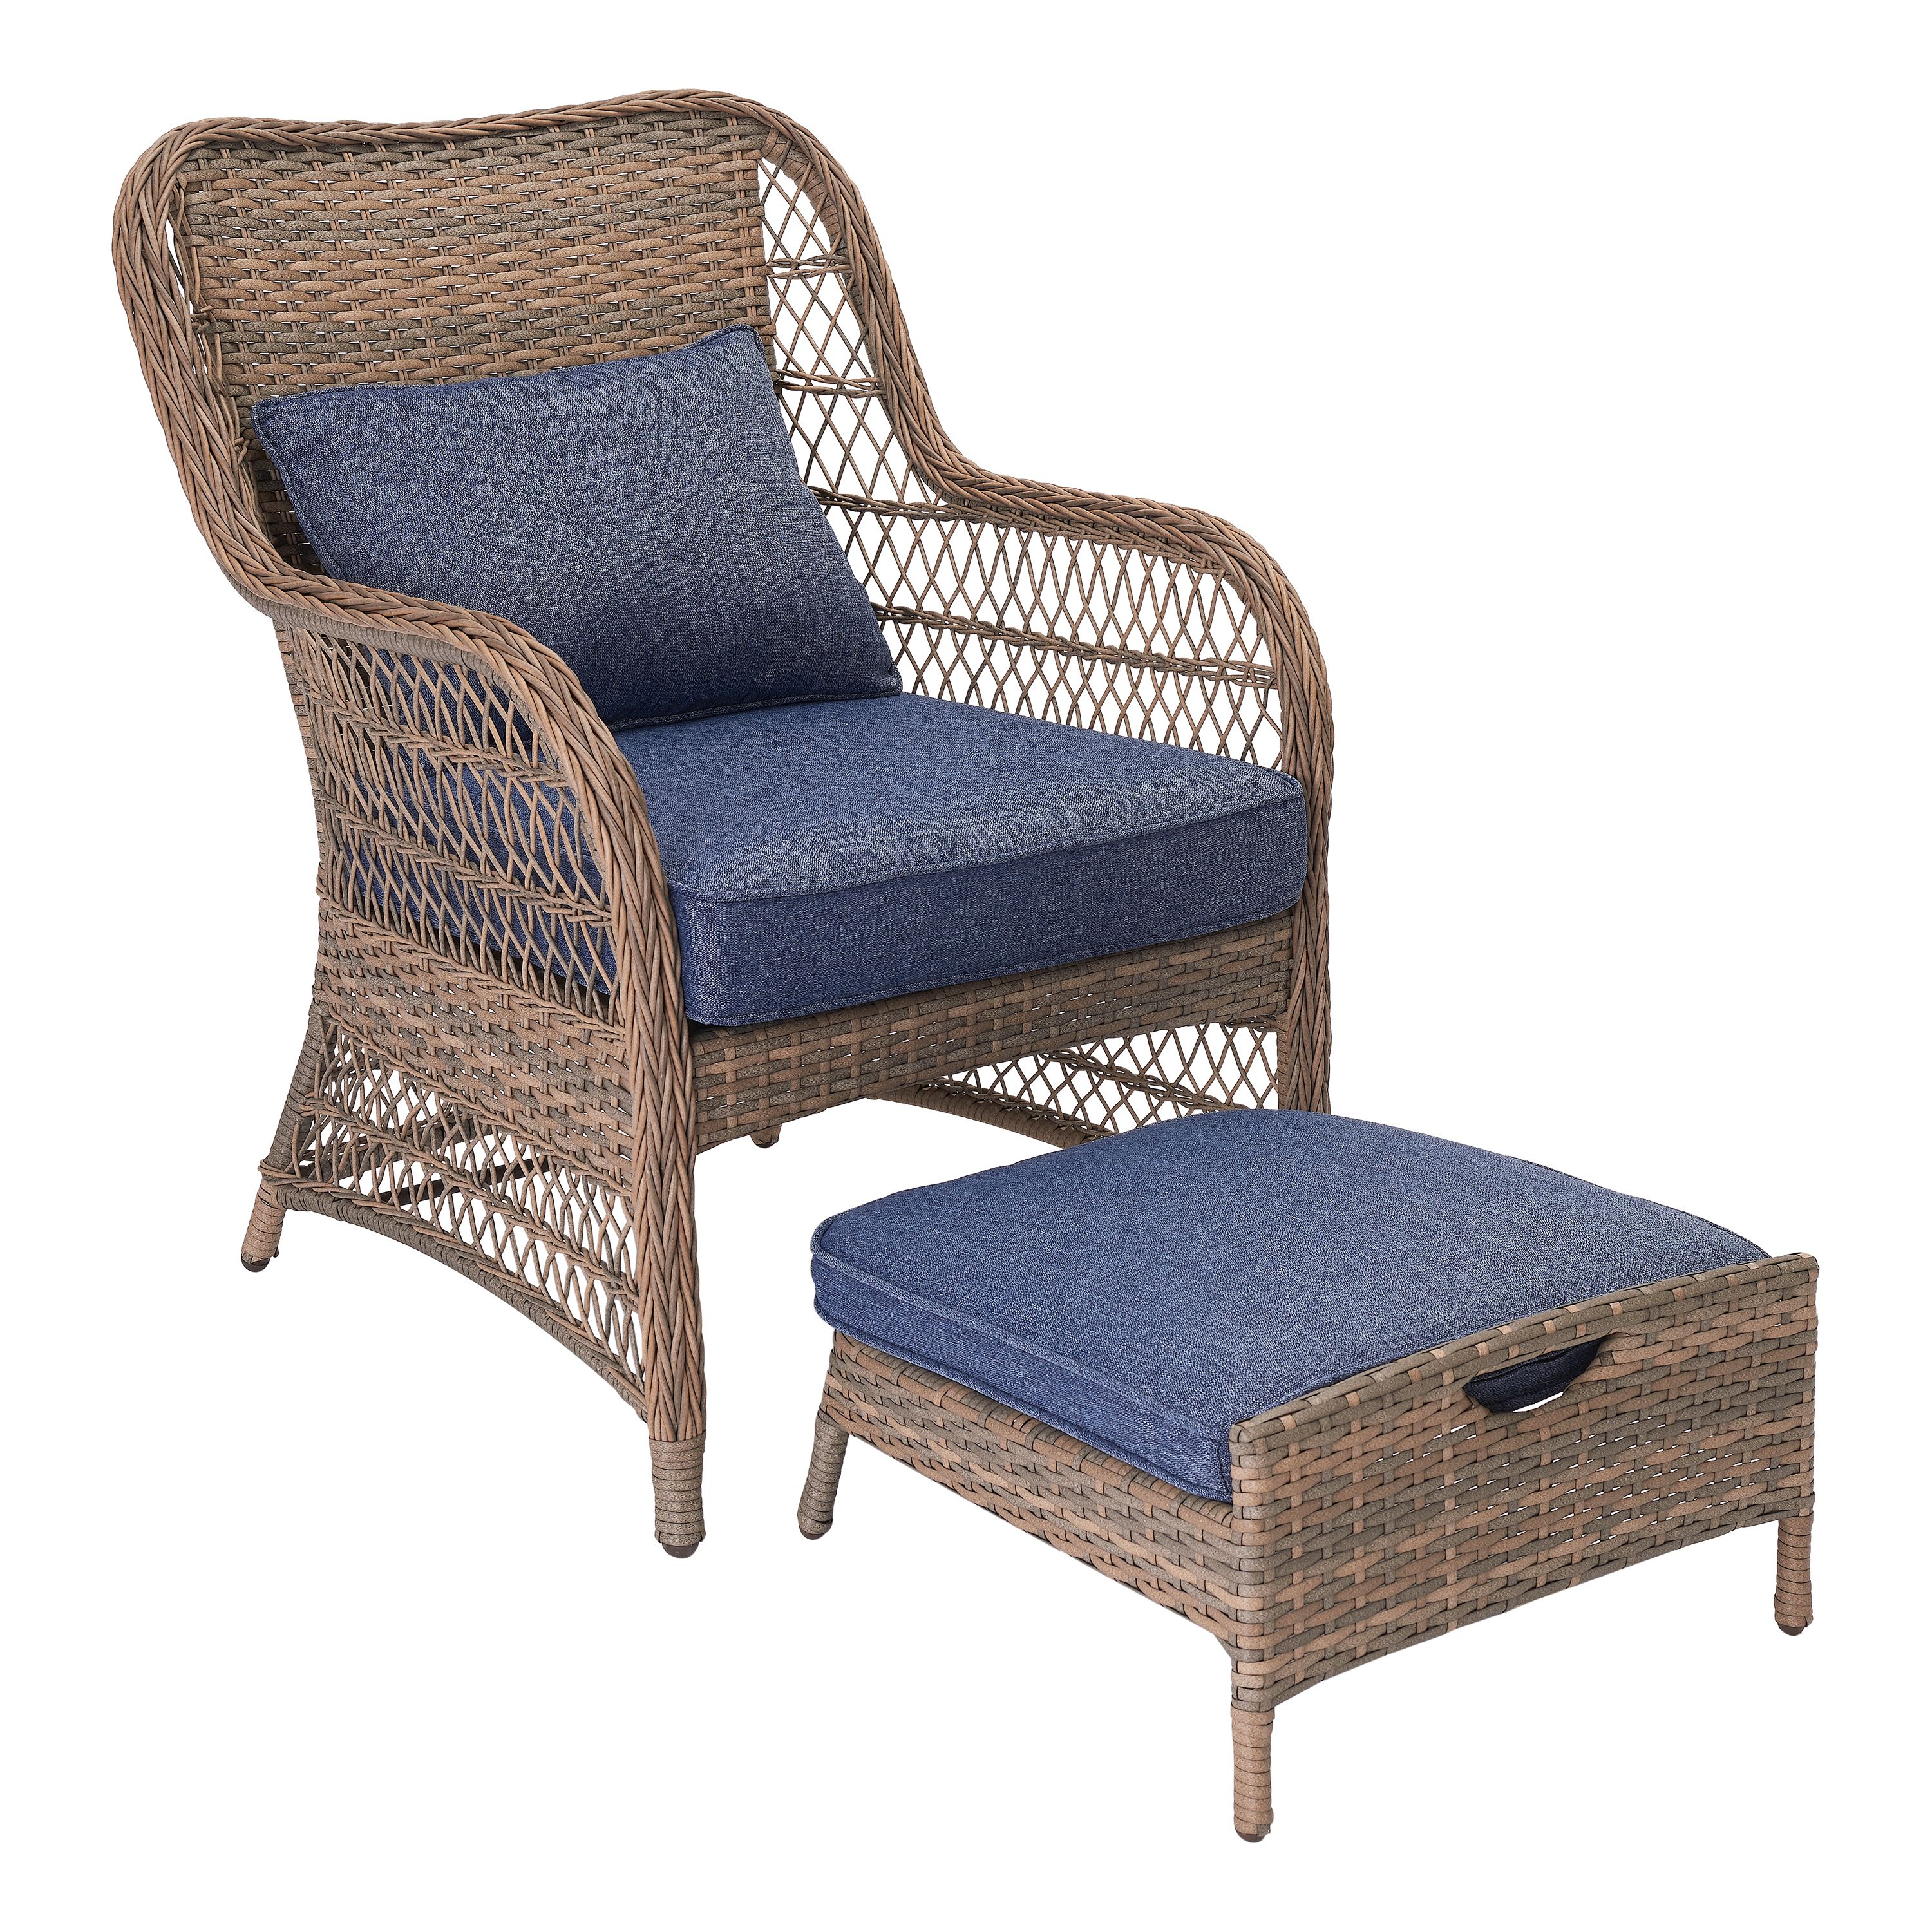 Better Homes & Gardens Auburn 5-Piece Wicker Patio Chat Set with Blue Cushions - image 3 of 8